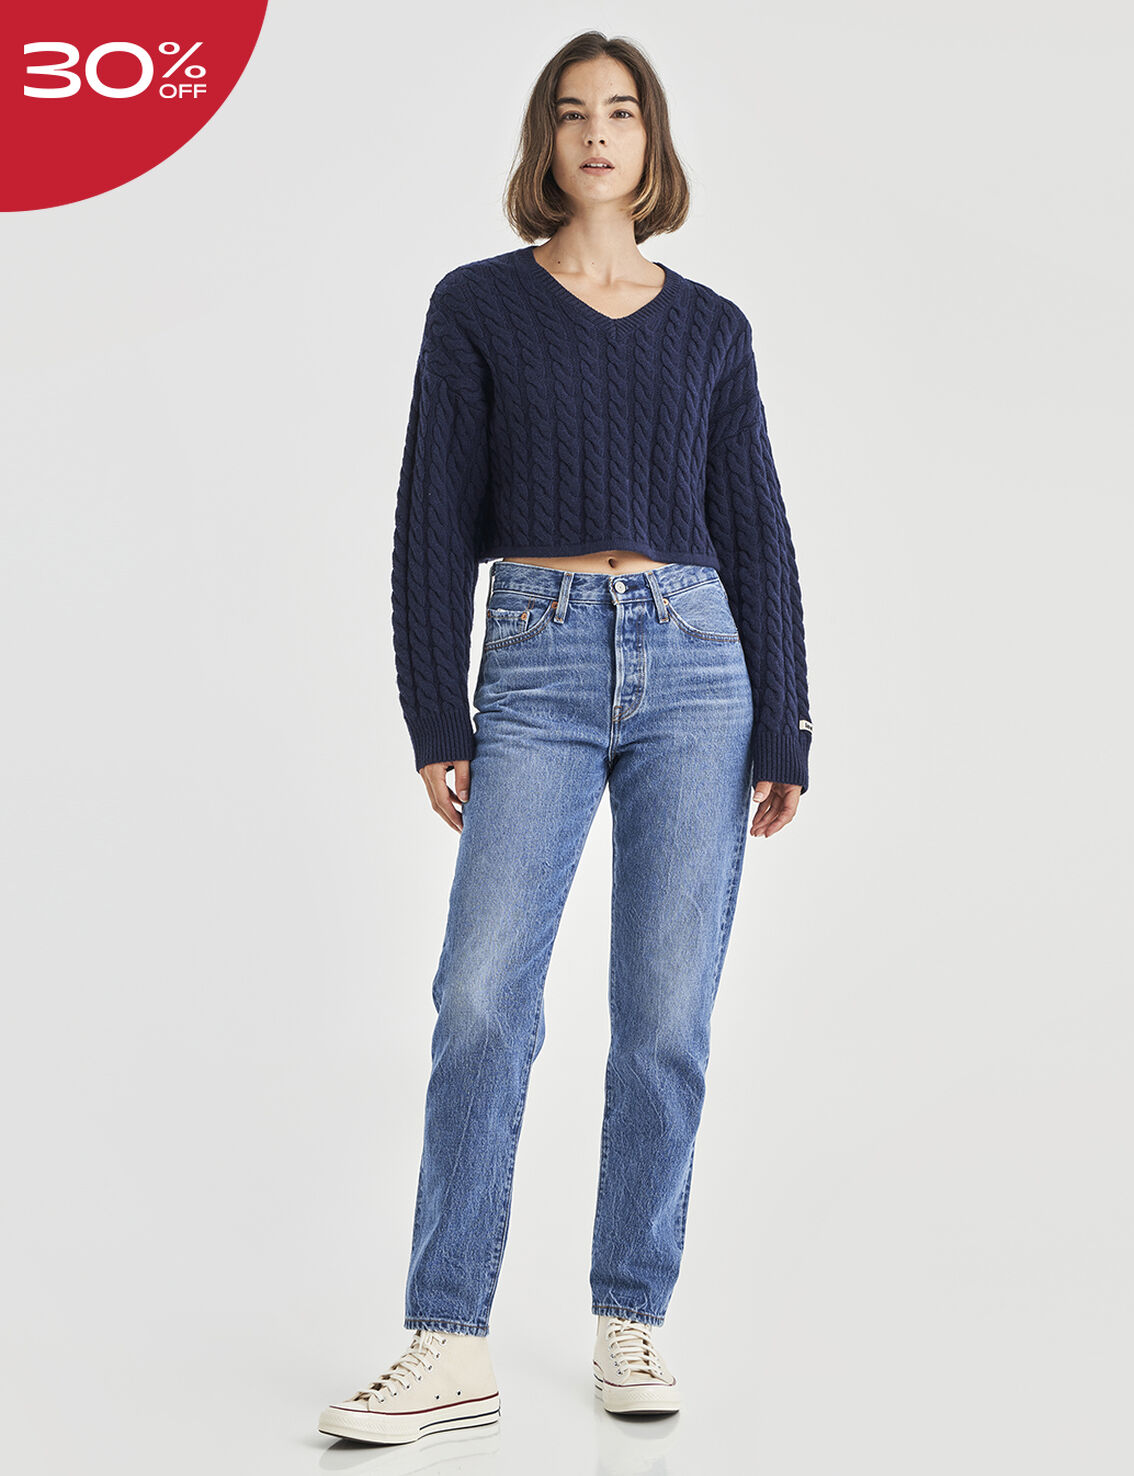 Women's Blue 501® '81 Jeans - Vintage-Inspired Fit Jeans